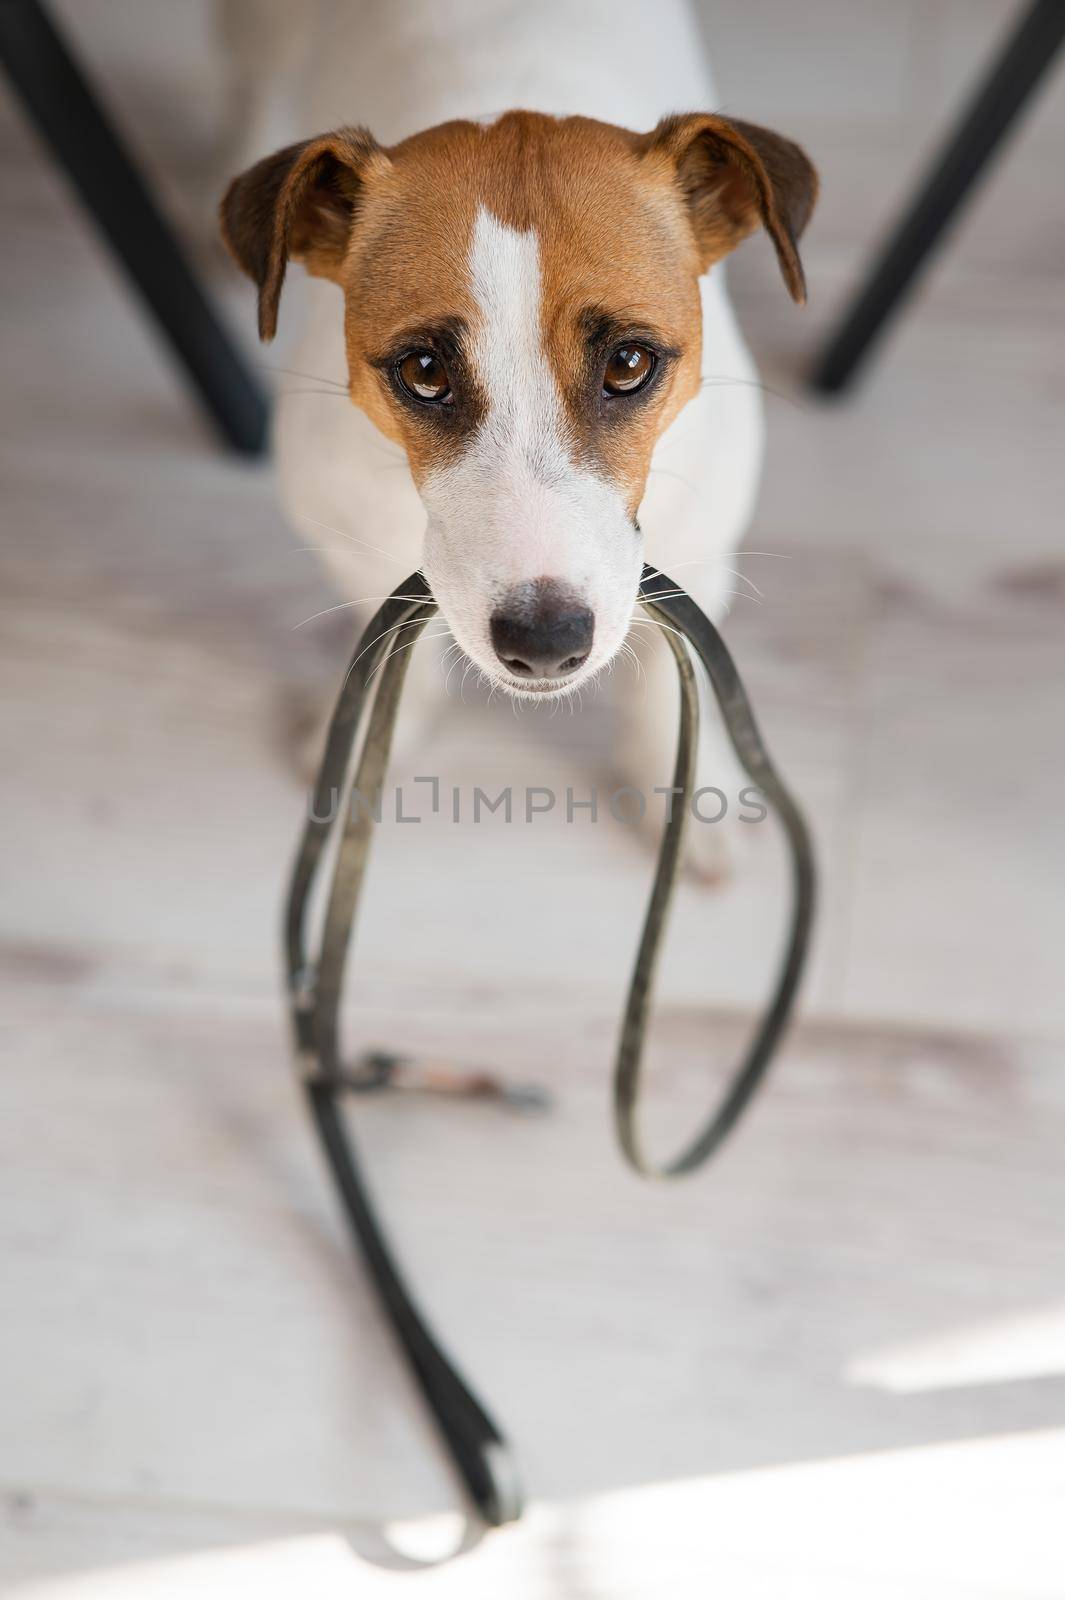 Jack Russell Terrier dog sits under the table with a leash in his teeth and calls the owner for a walk. by mrwed54